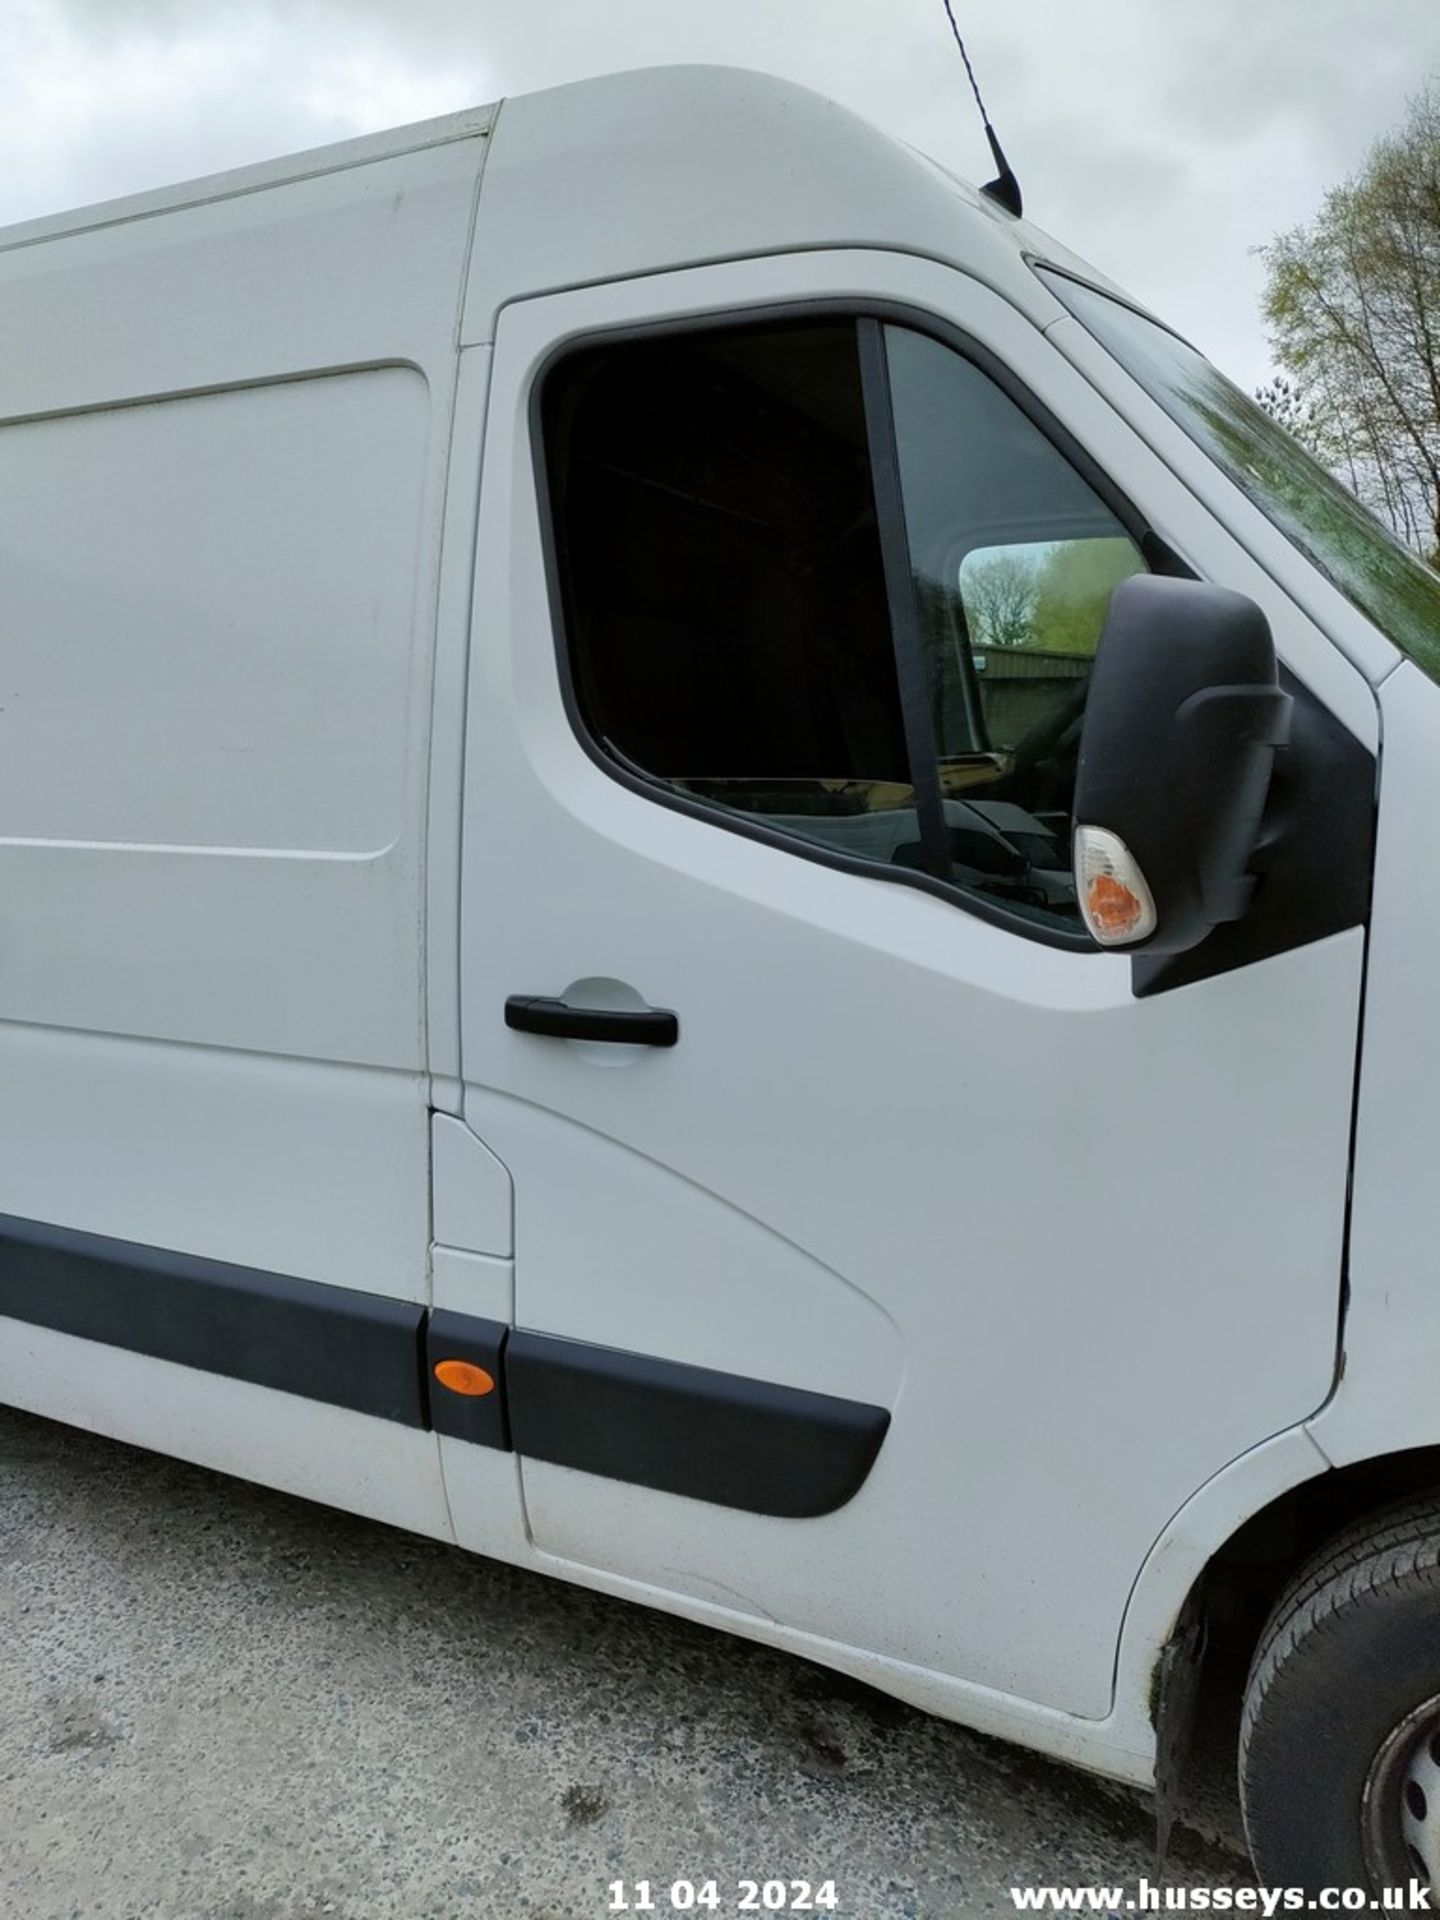 18/68 RENAULT MASTER LM35 BUSINESS DCI - 2298cc 5dr Van (White) - Image 49 of 68